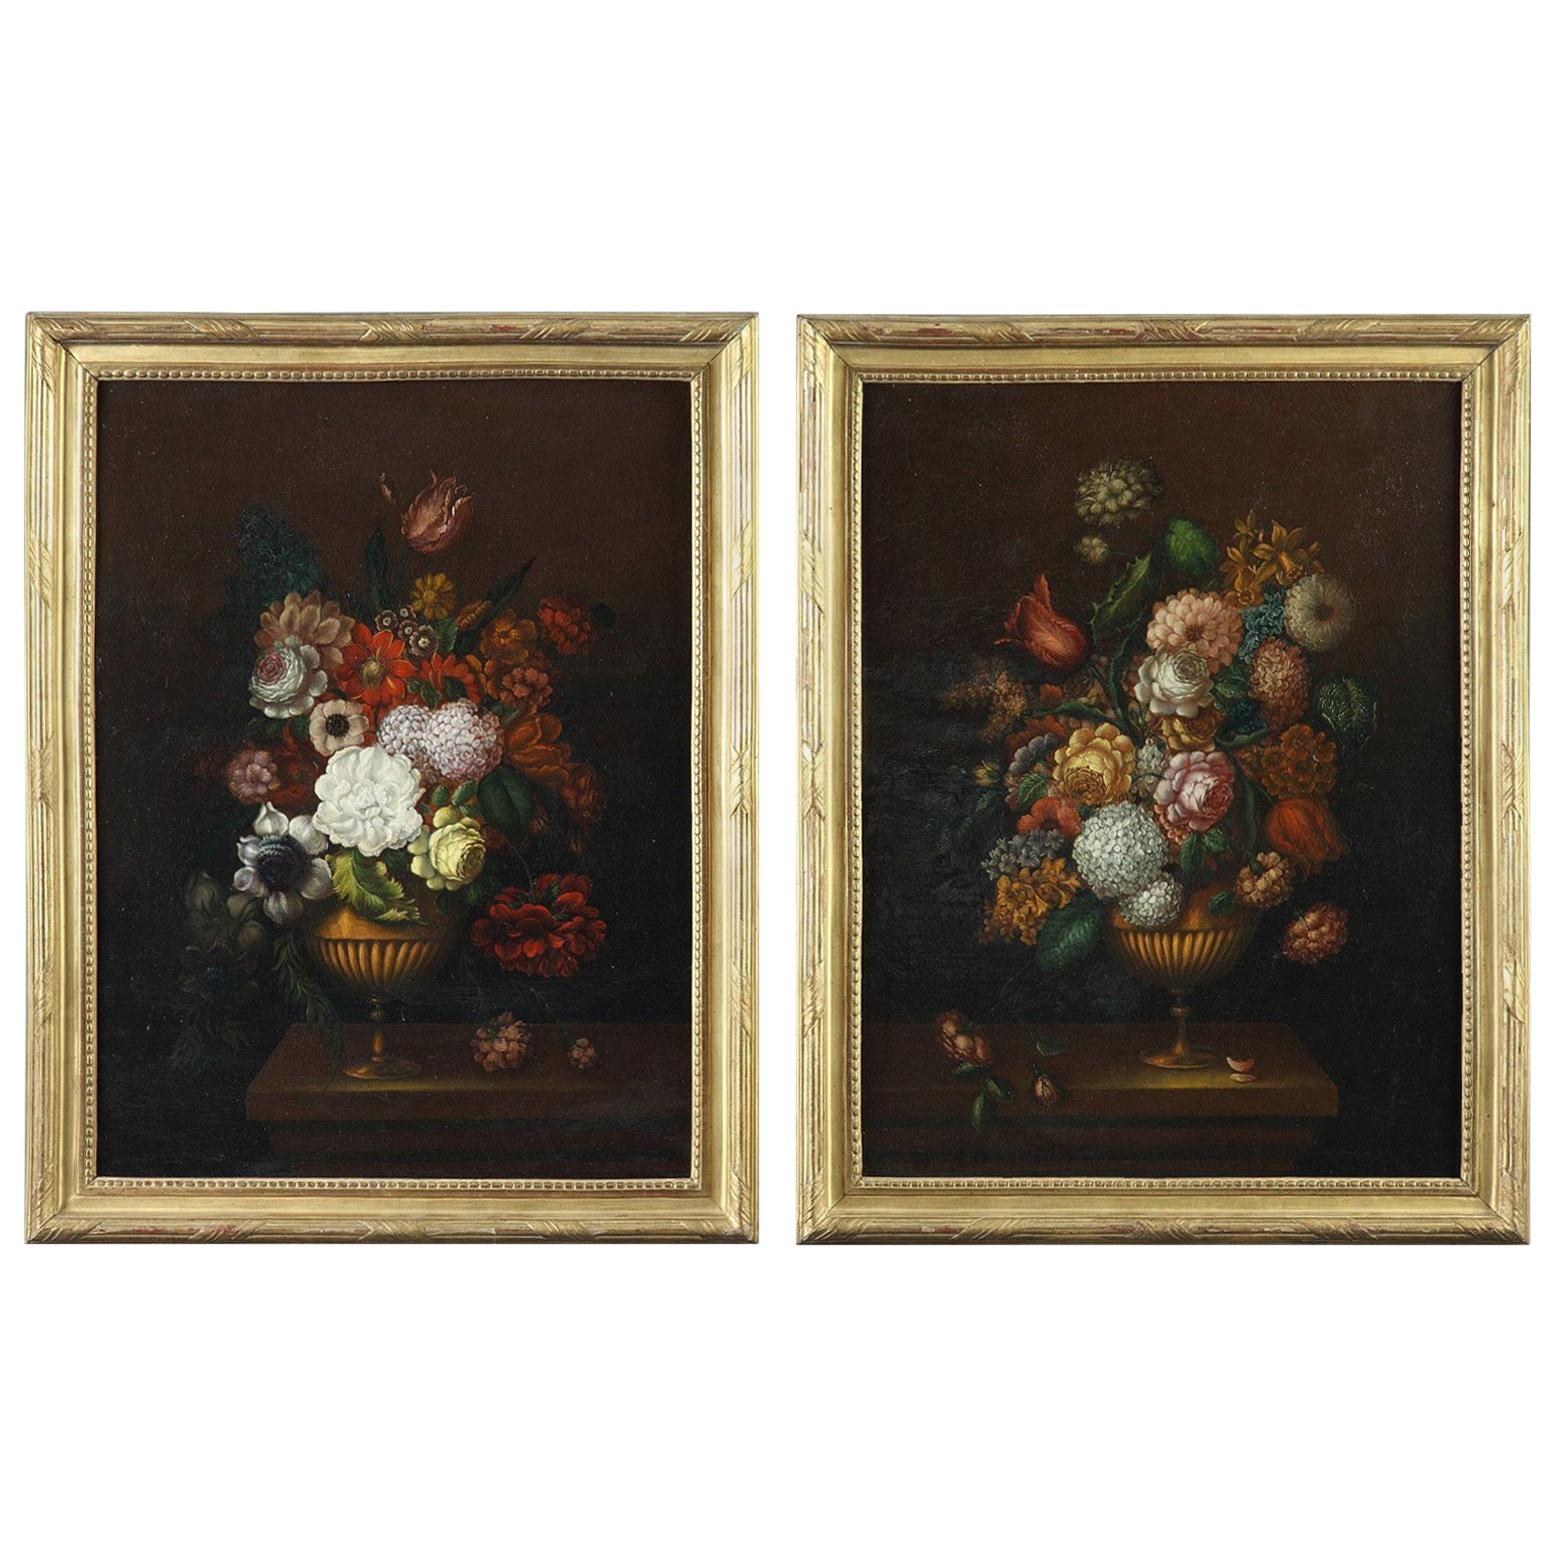 19th Century Paintings Flower Bouquets in the Dutch School Style